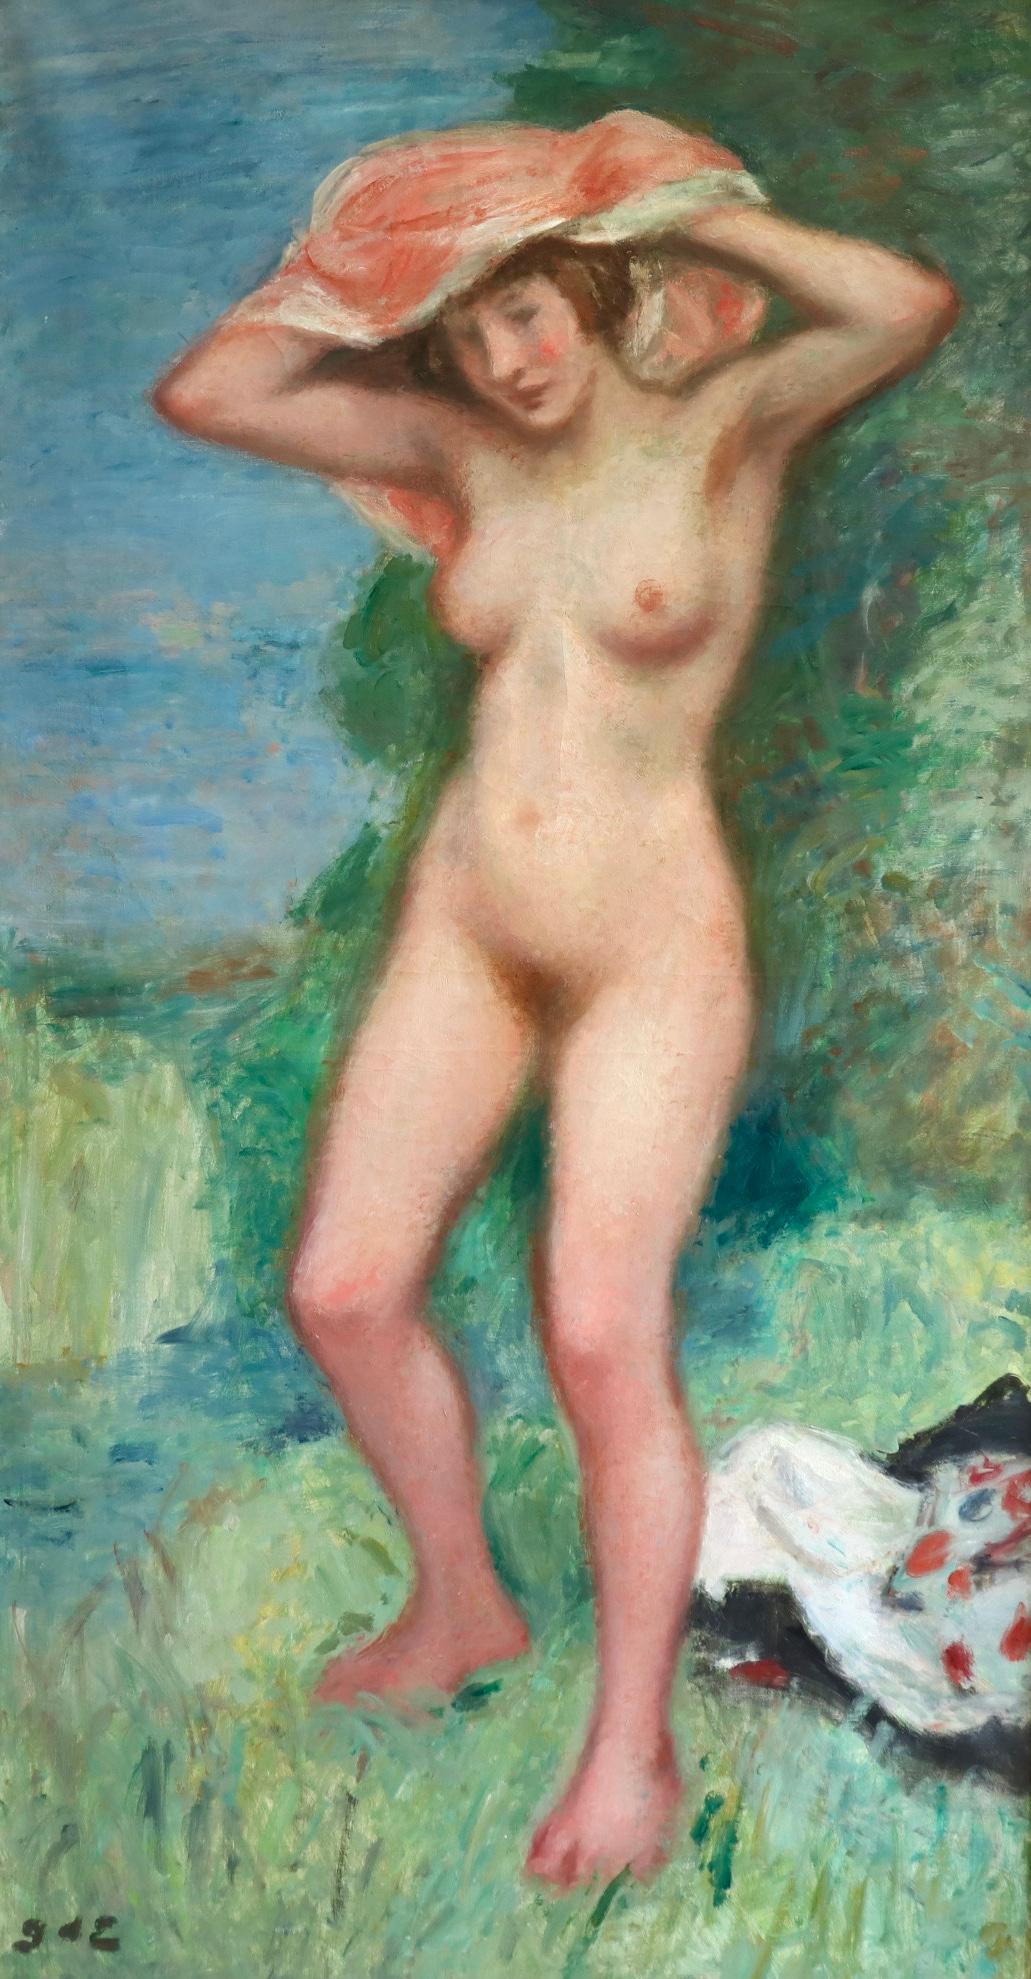 La Baigneuse - Post Impressionist Oil, Nude in Landscape by Georges D'Espagnat